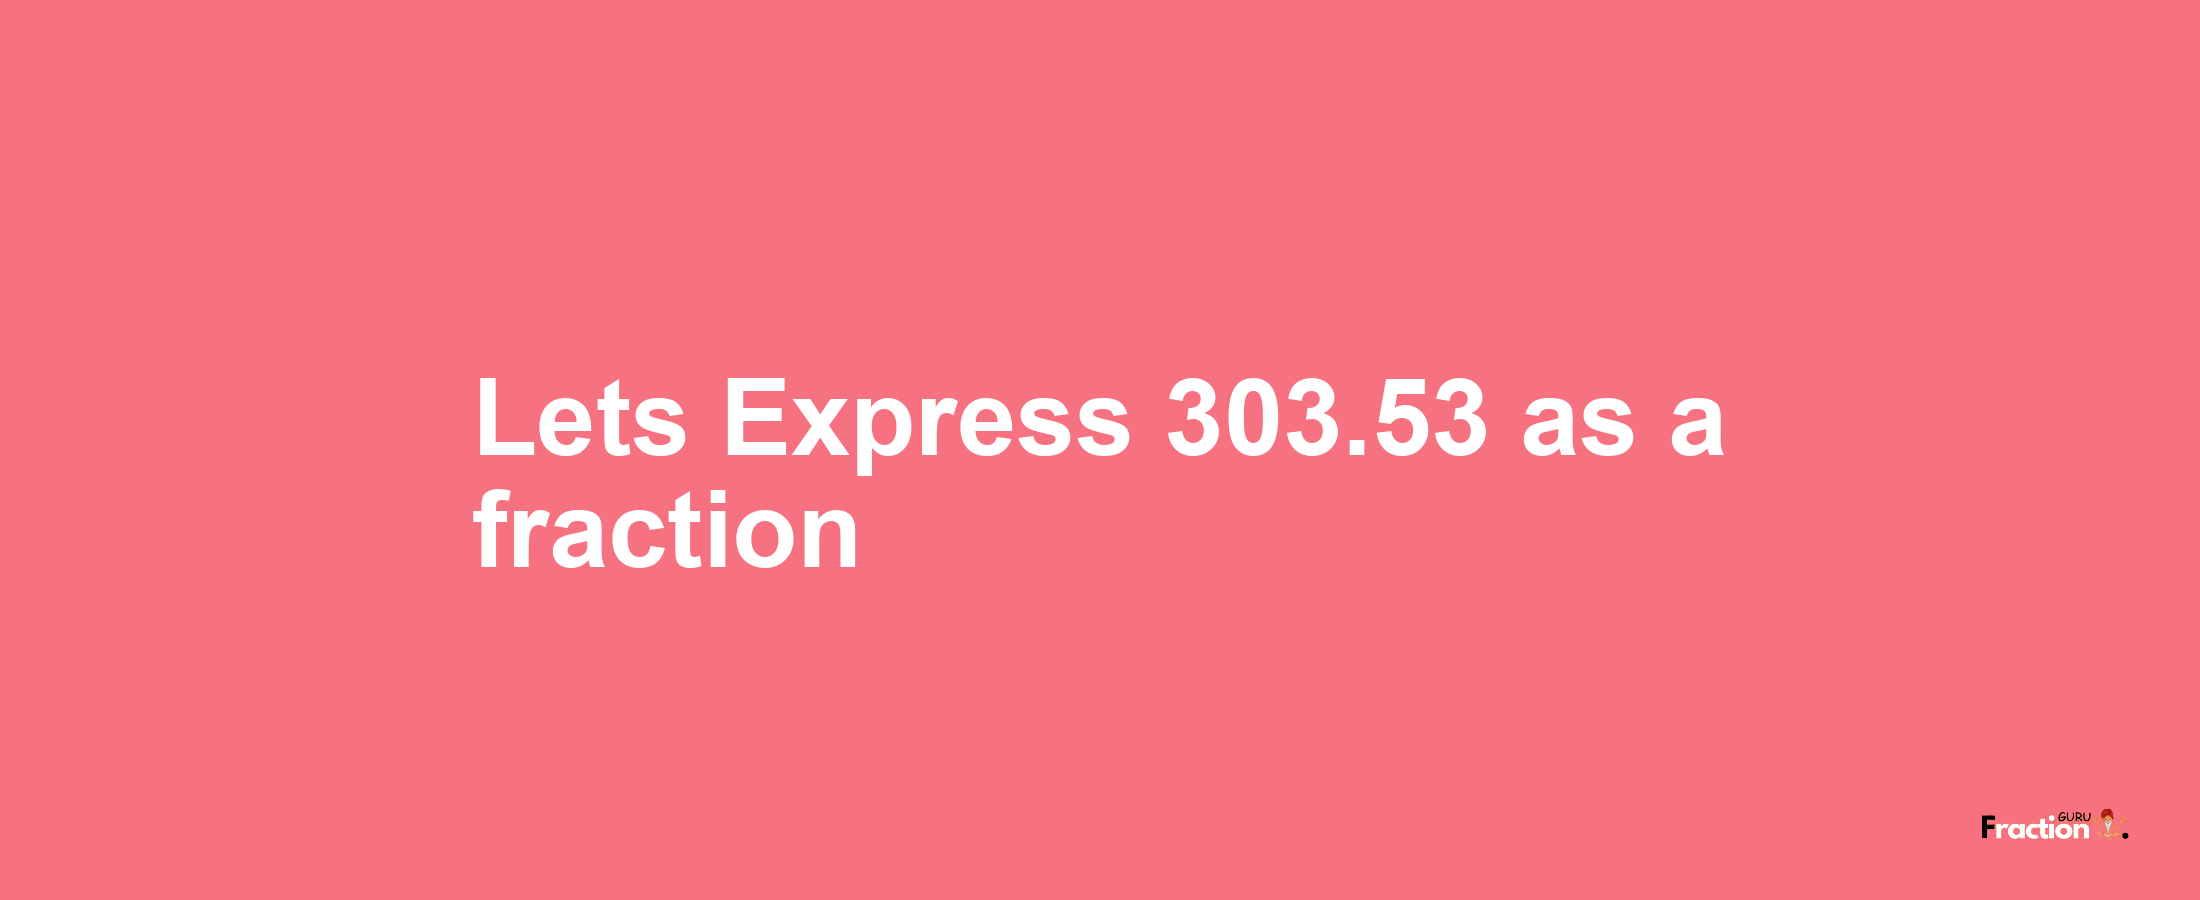 Lets Express 303.53 as afraction